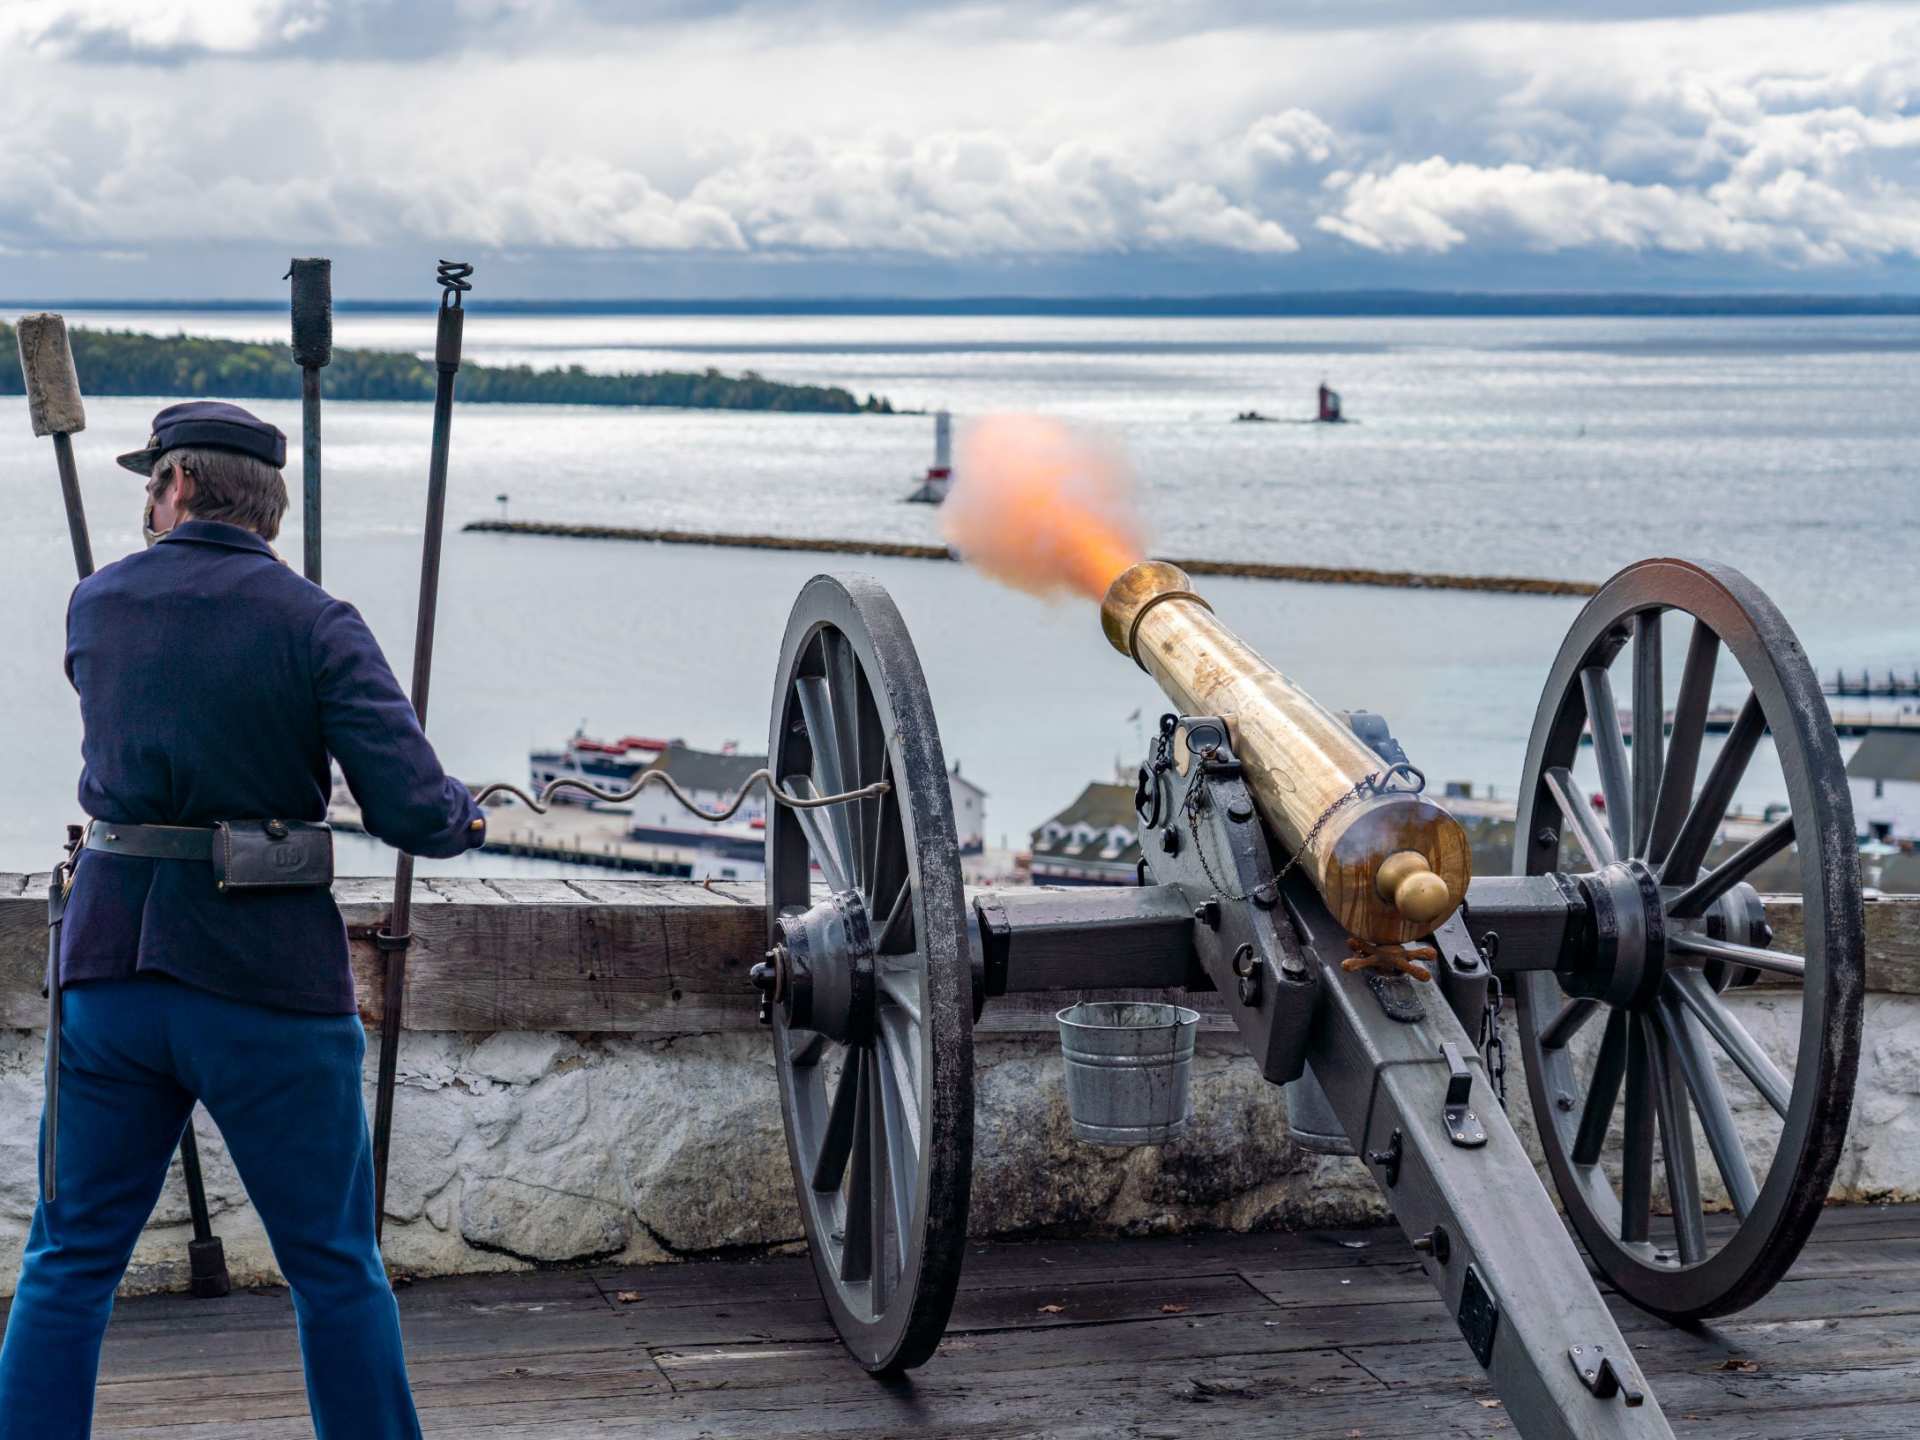 Mission Point | A soldier firing the cannon at Fort Mackinac on Mackinac Island